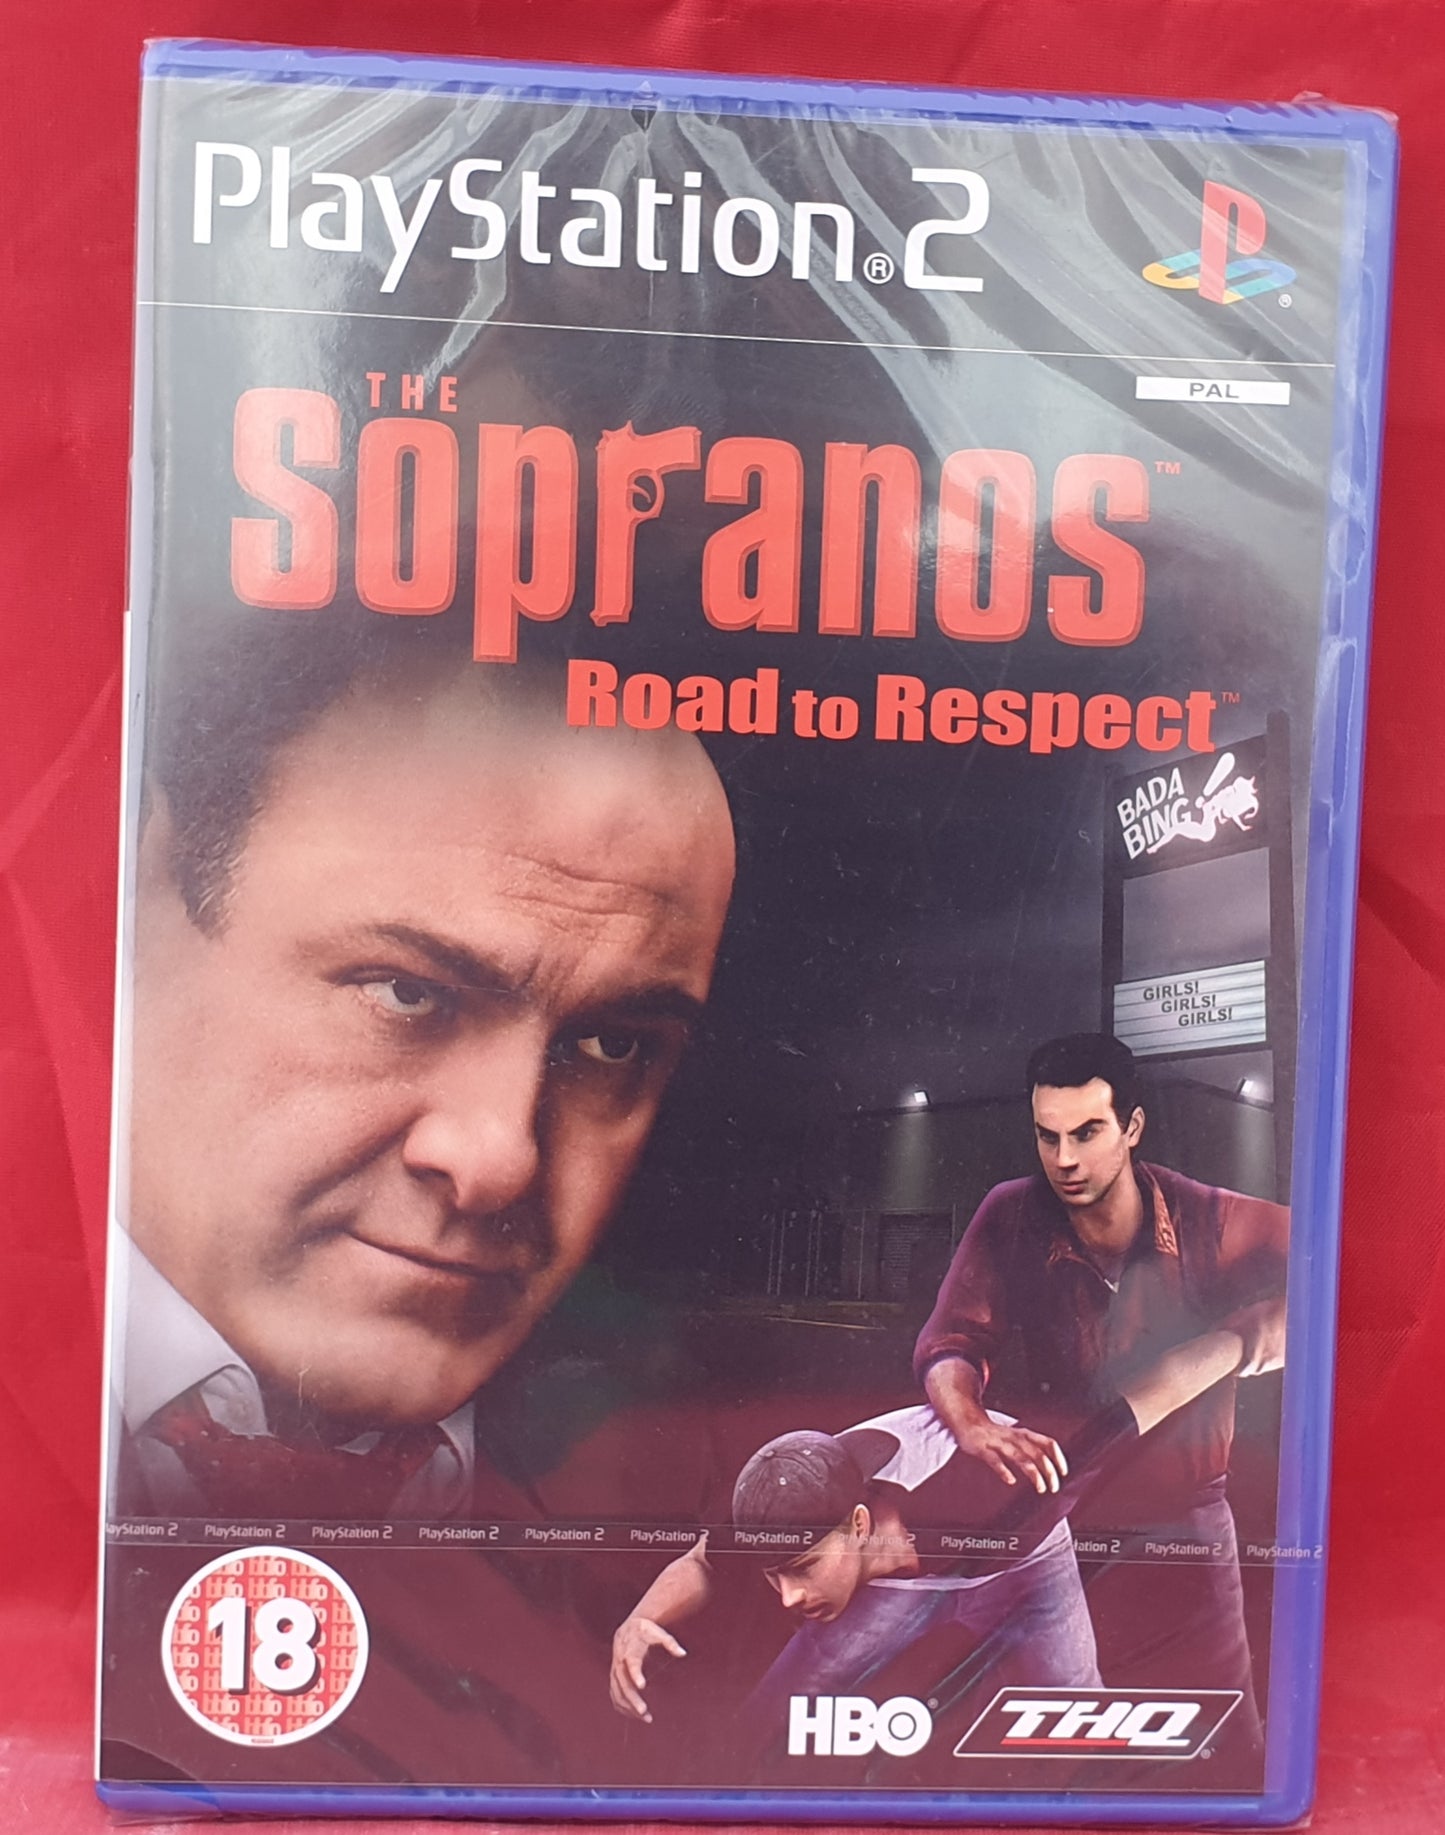 Brand New and Sealed The Sopranos Road to Respect Sony Playstation 2 (PS2) Game